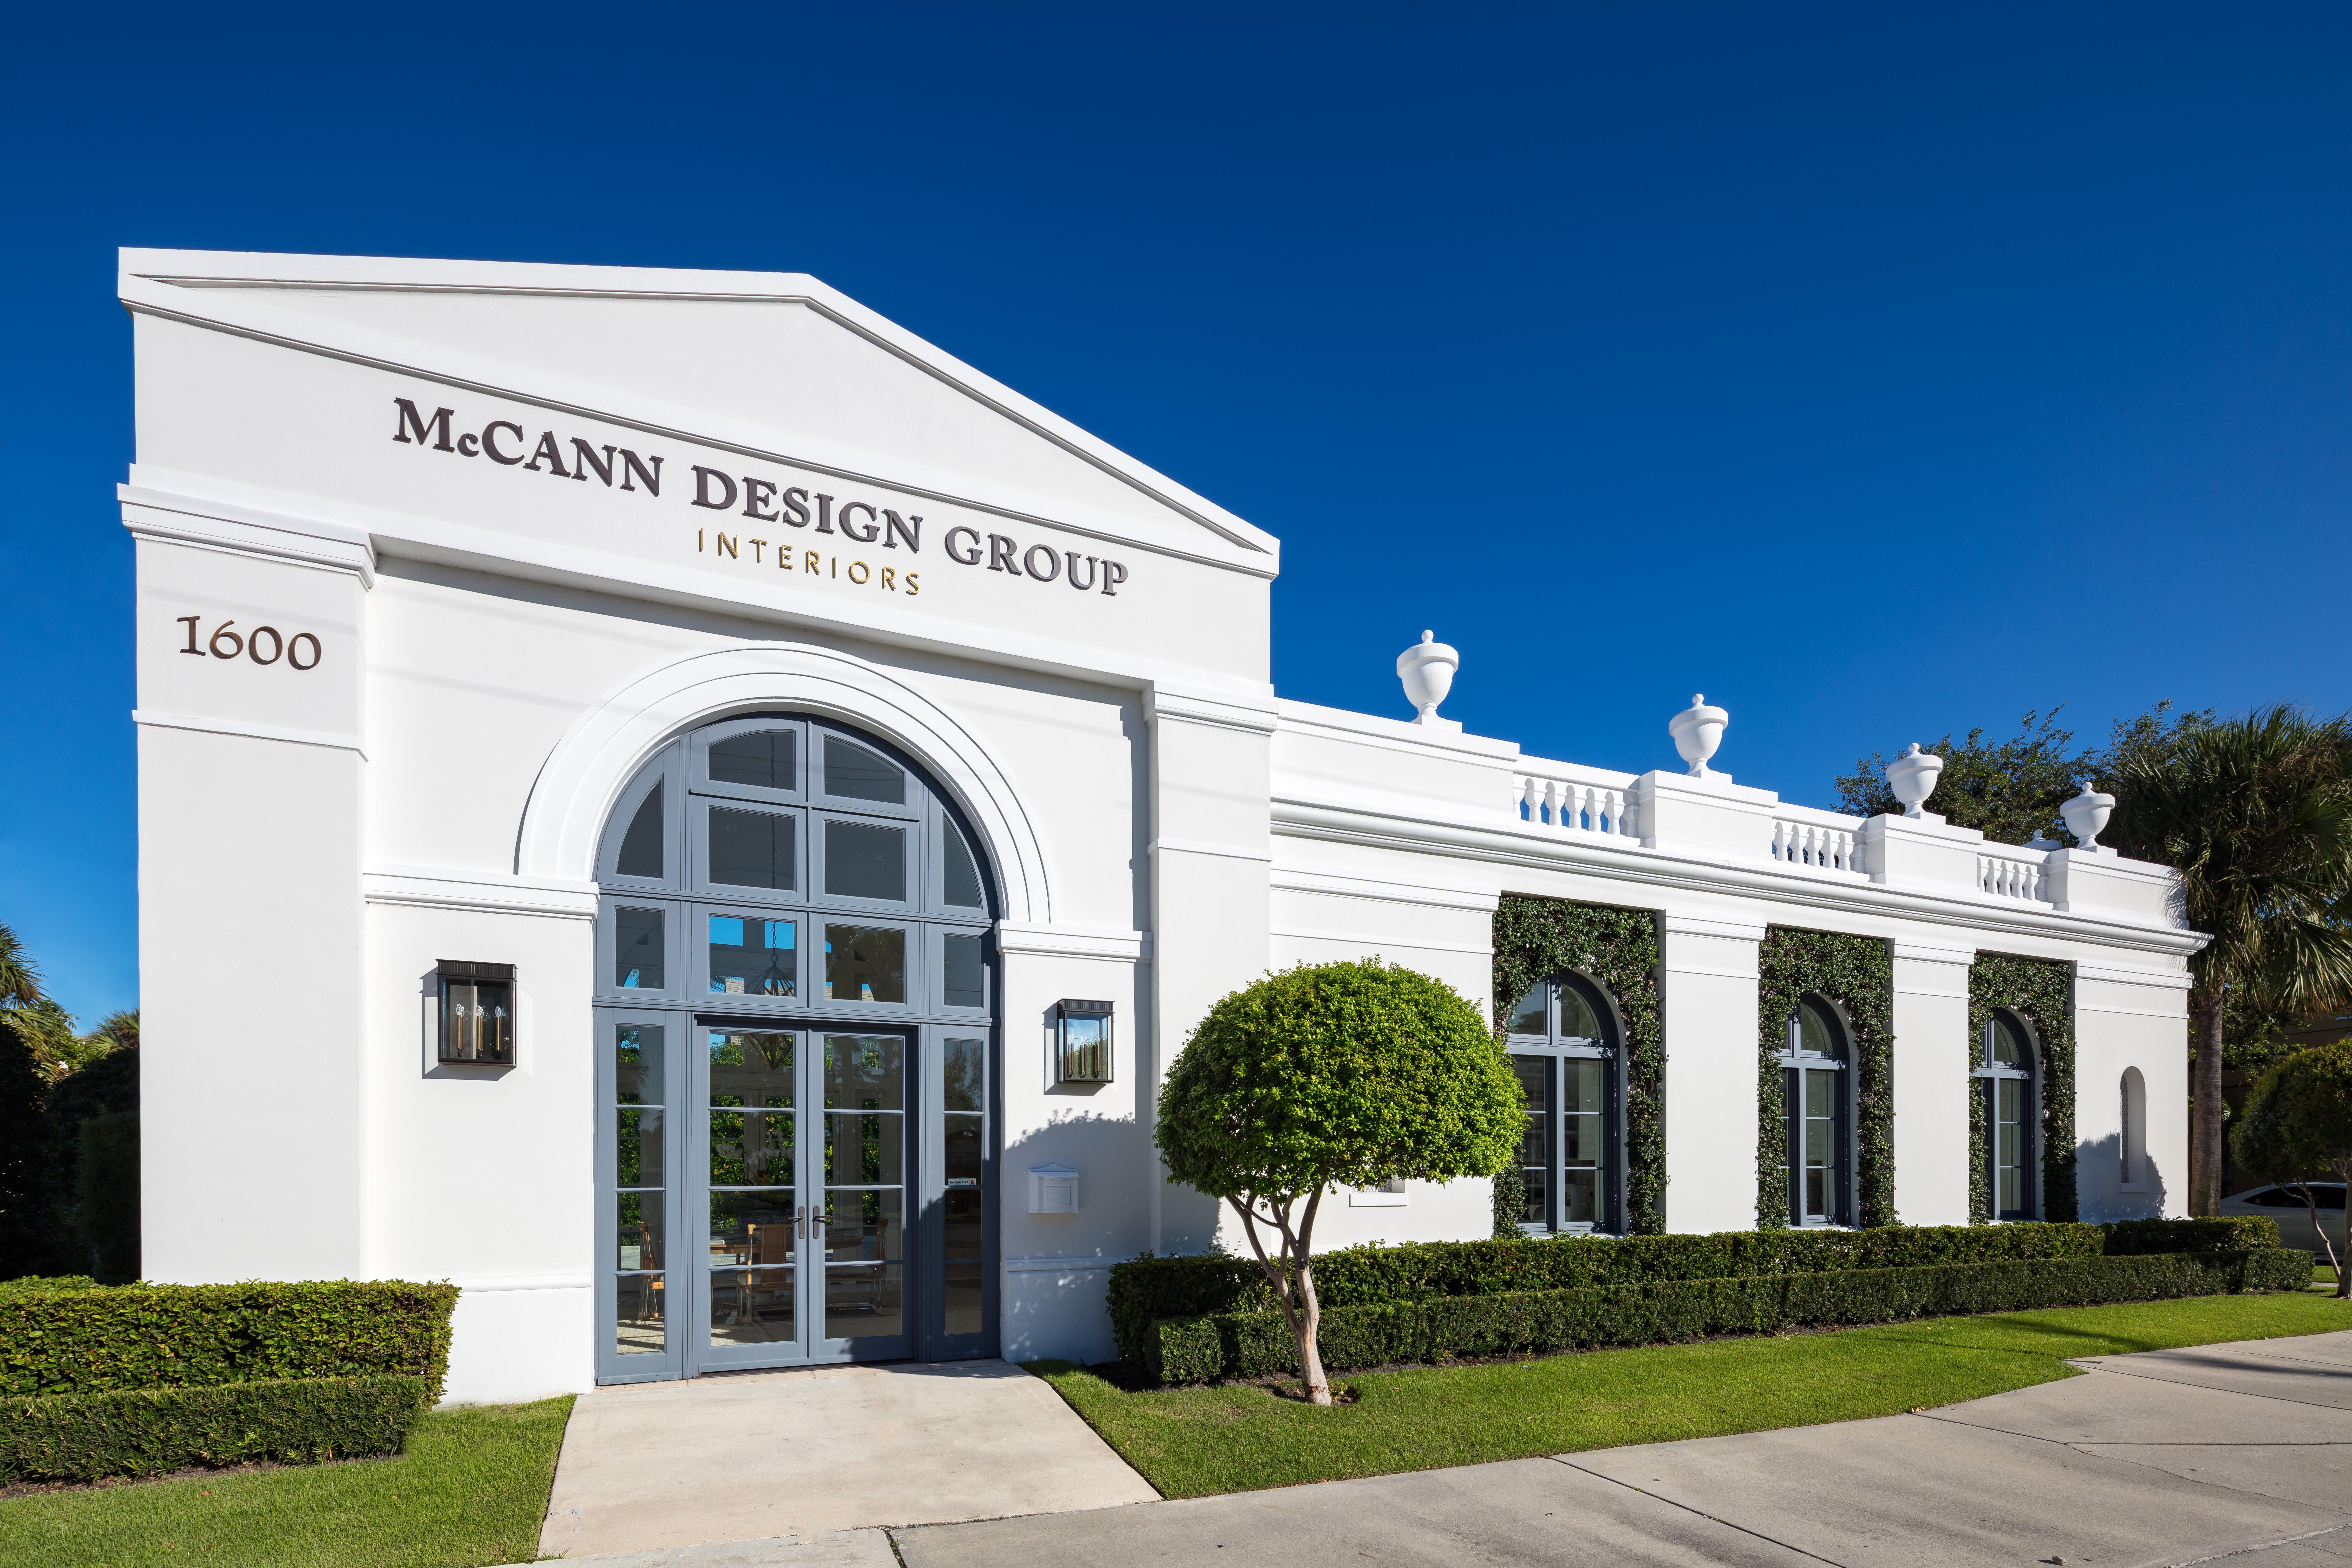 A Photo of the McCann Design Group Storefront